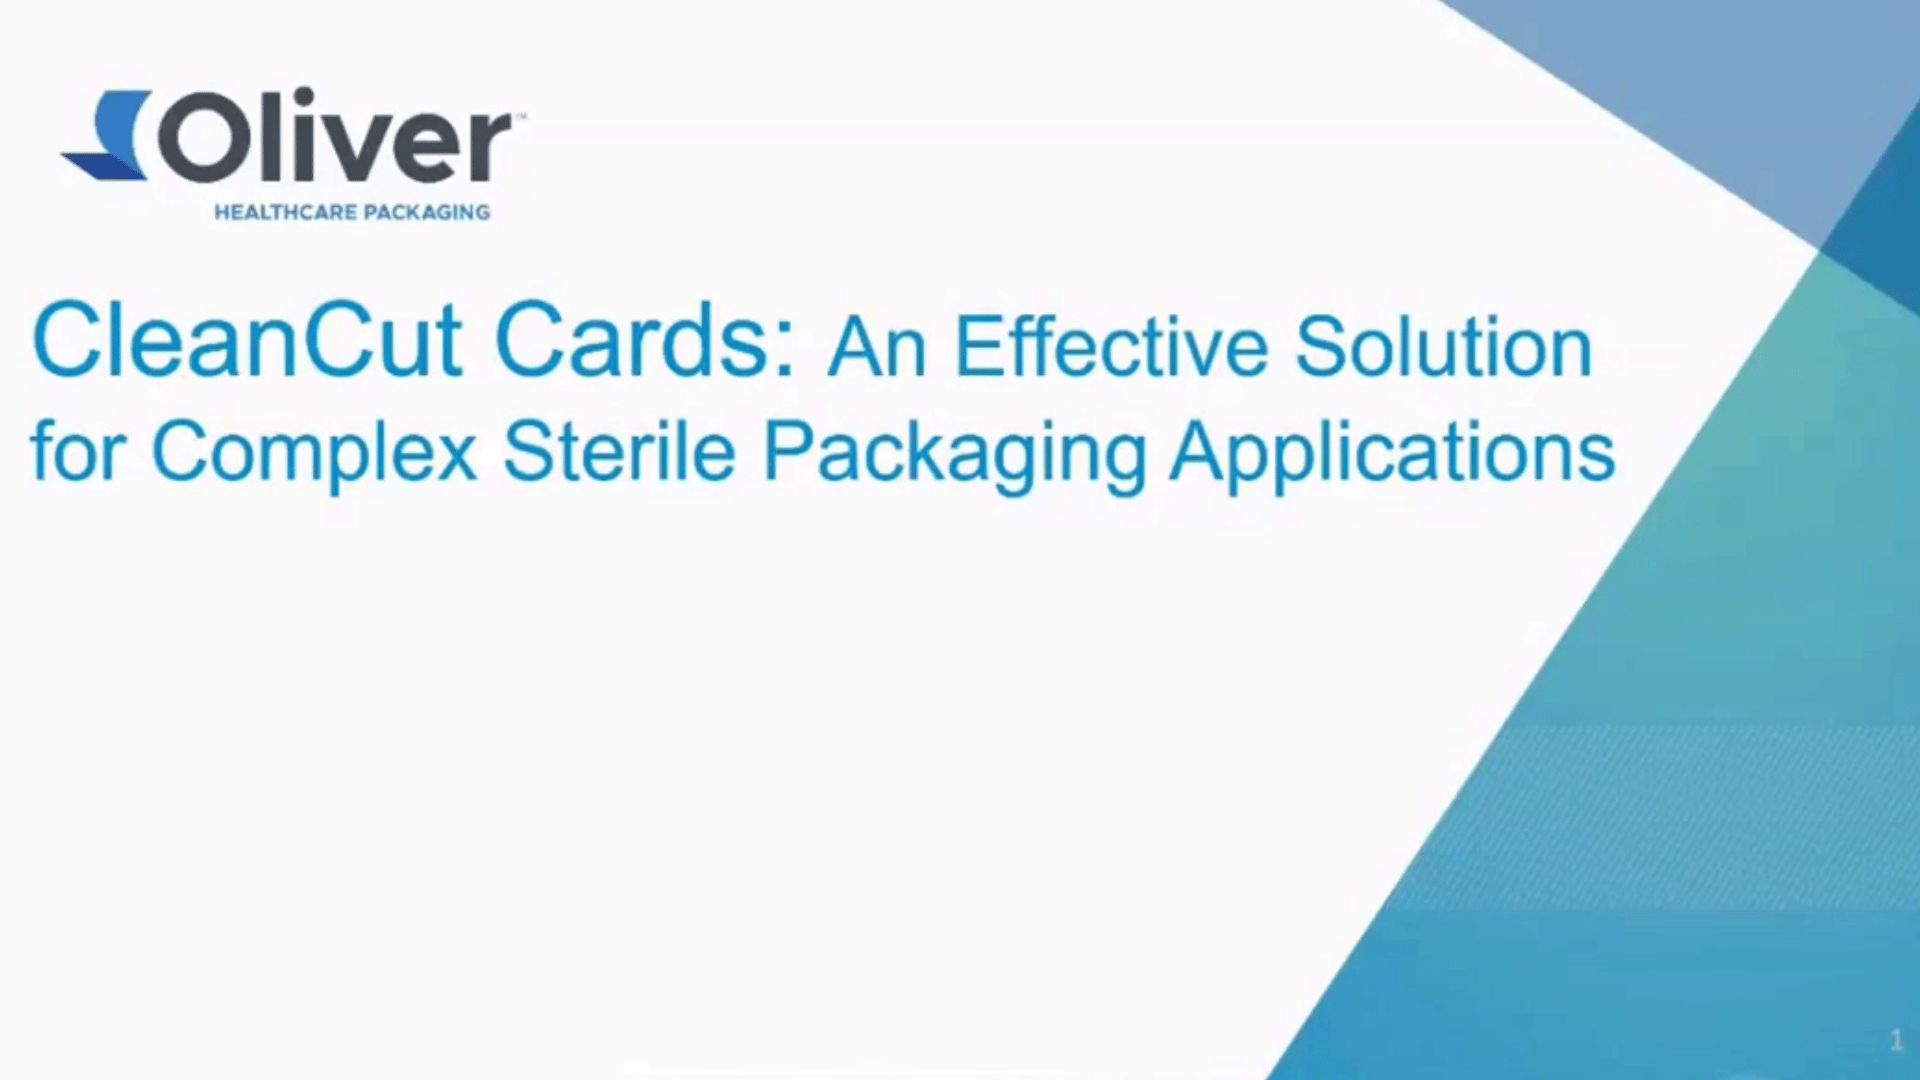 CleanCut Cards for Complex Sterile Packaging